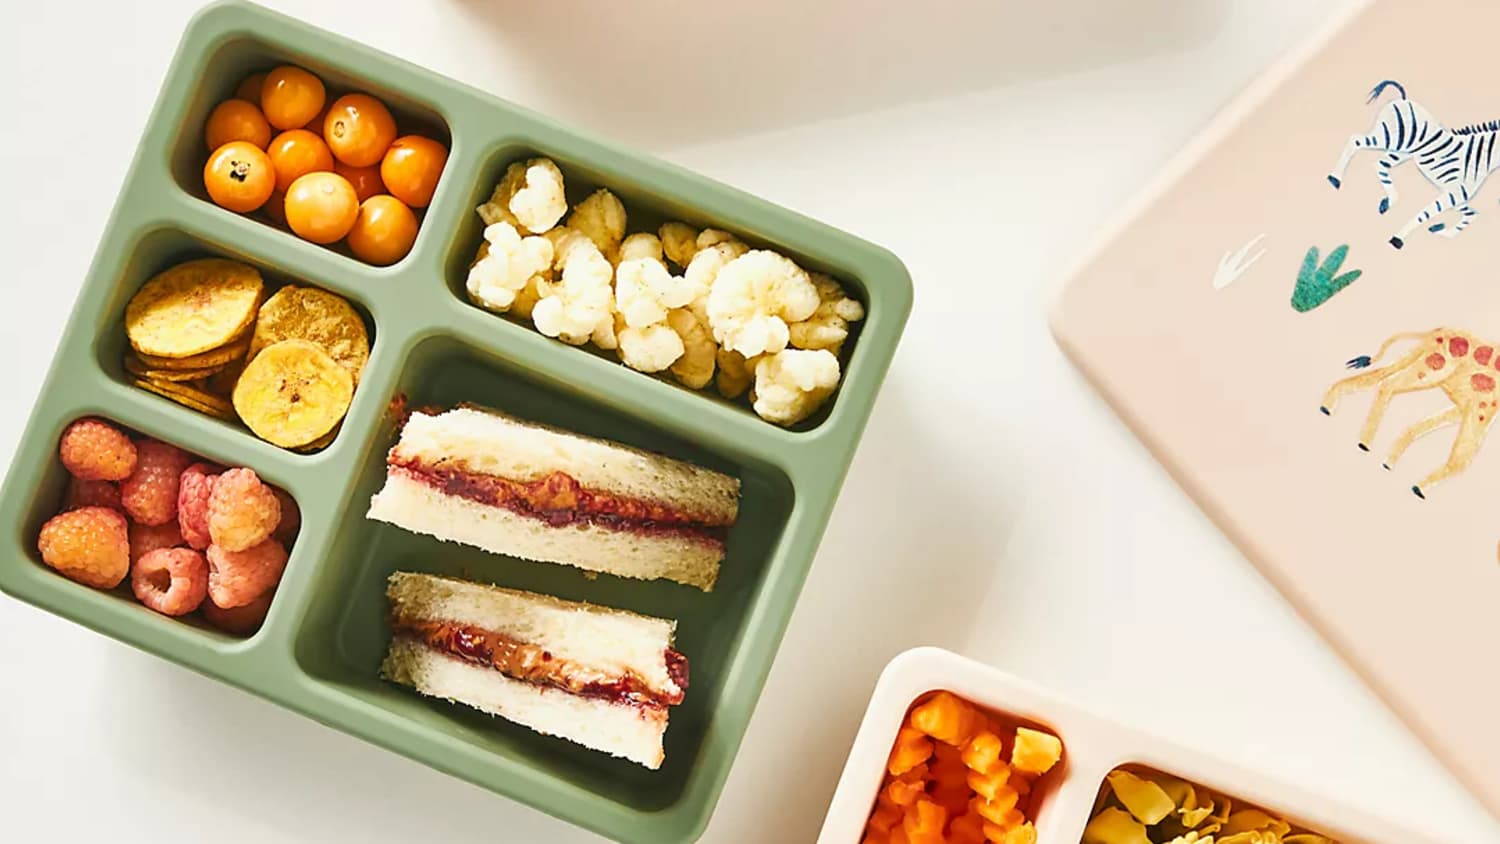 10 Easy and Yummy Bento Box Lunch Ideas + Our Favorite Bento Boxes -  Glitter, Inc.